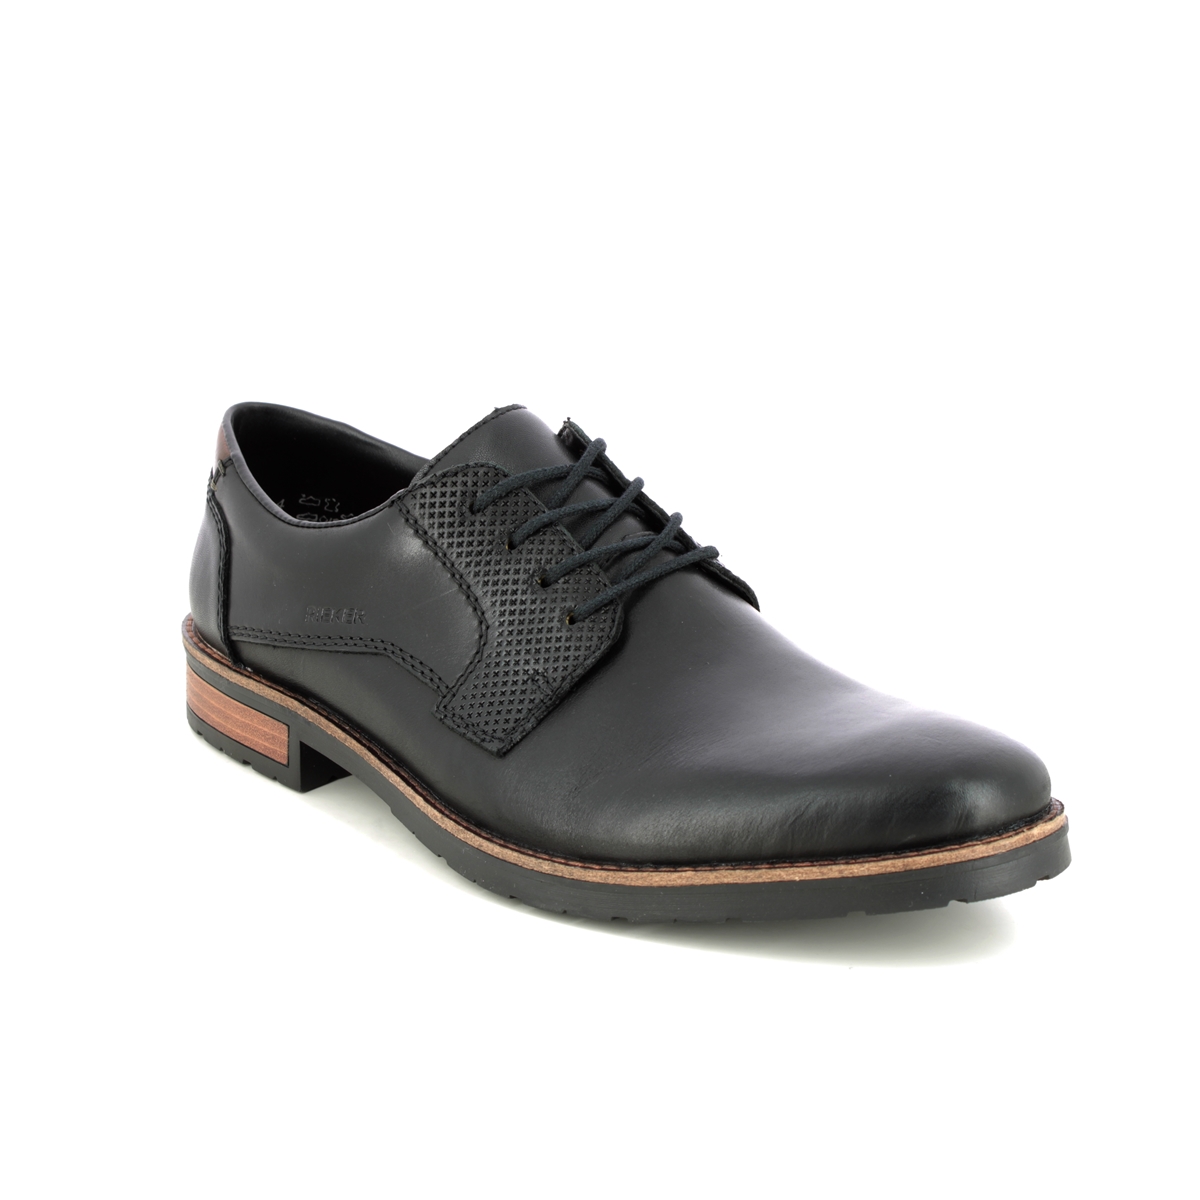 Rieker Claradam Black Leather Mens Formal Shoes 14601-00 In Size 42 In Plain Black Leather